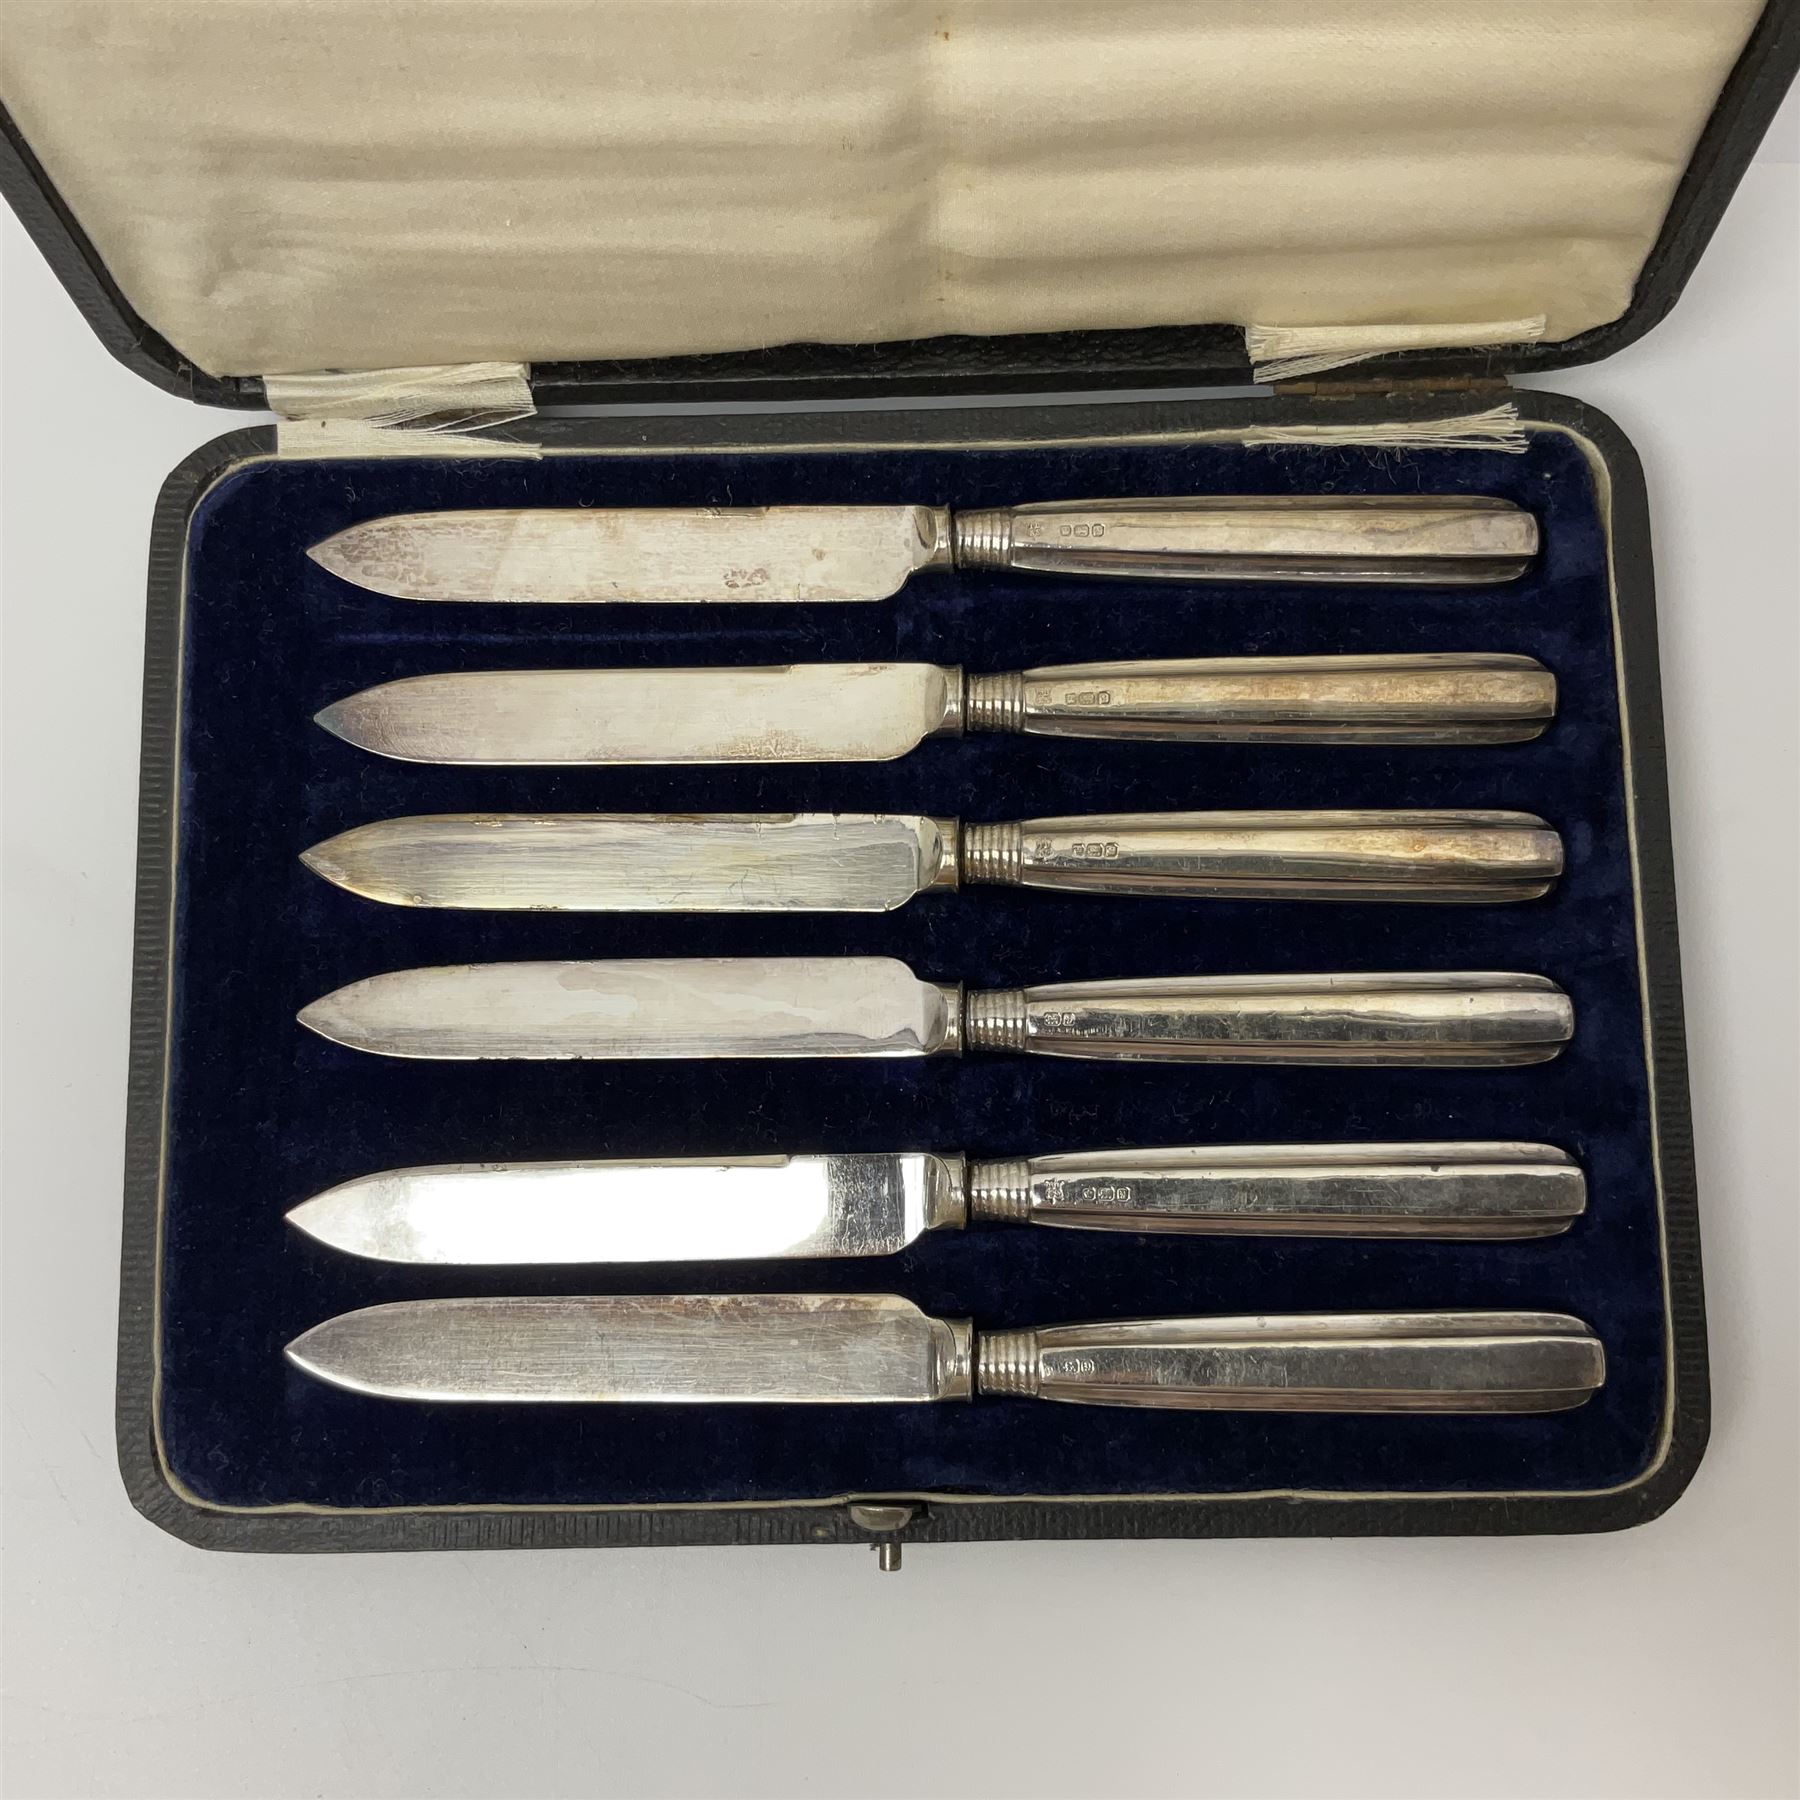 Early 20th century set of six silver handled knives - Image 3 of 9